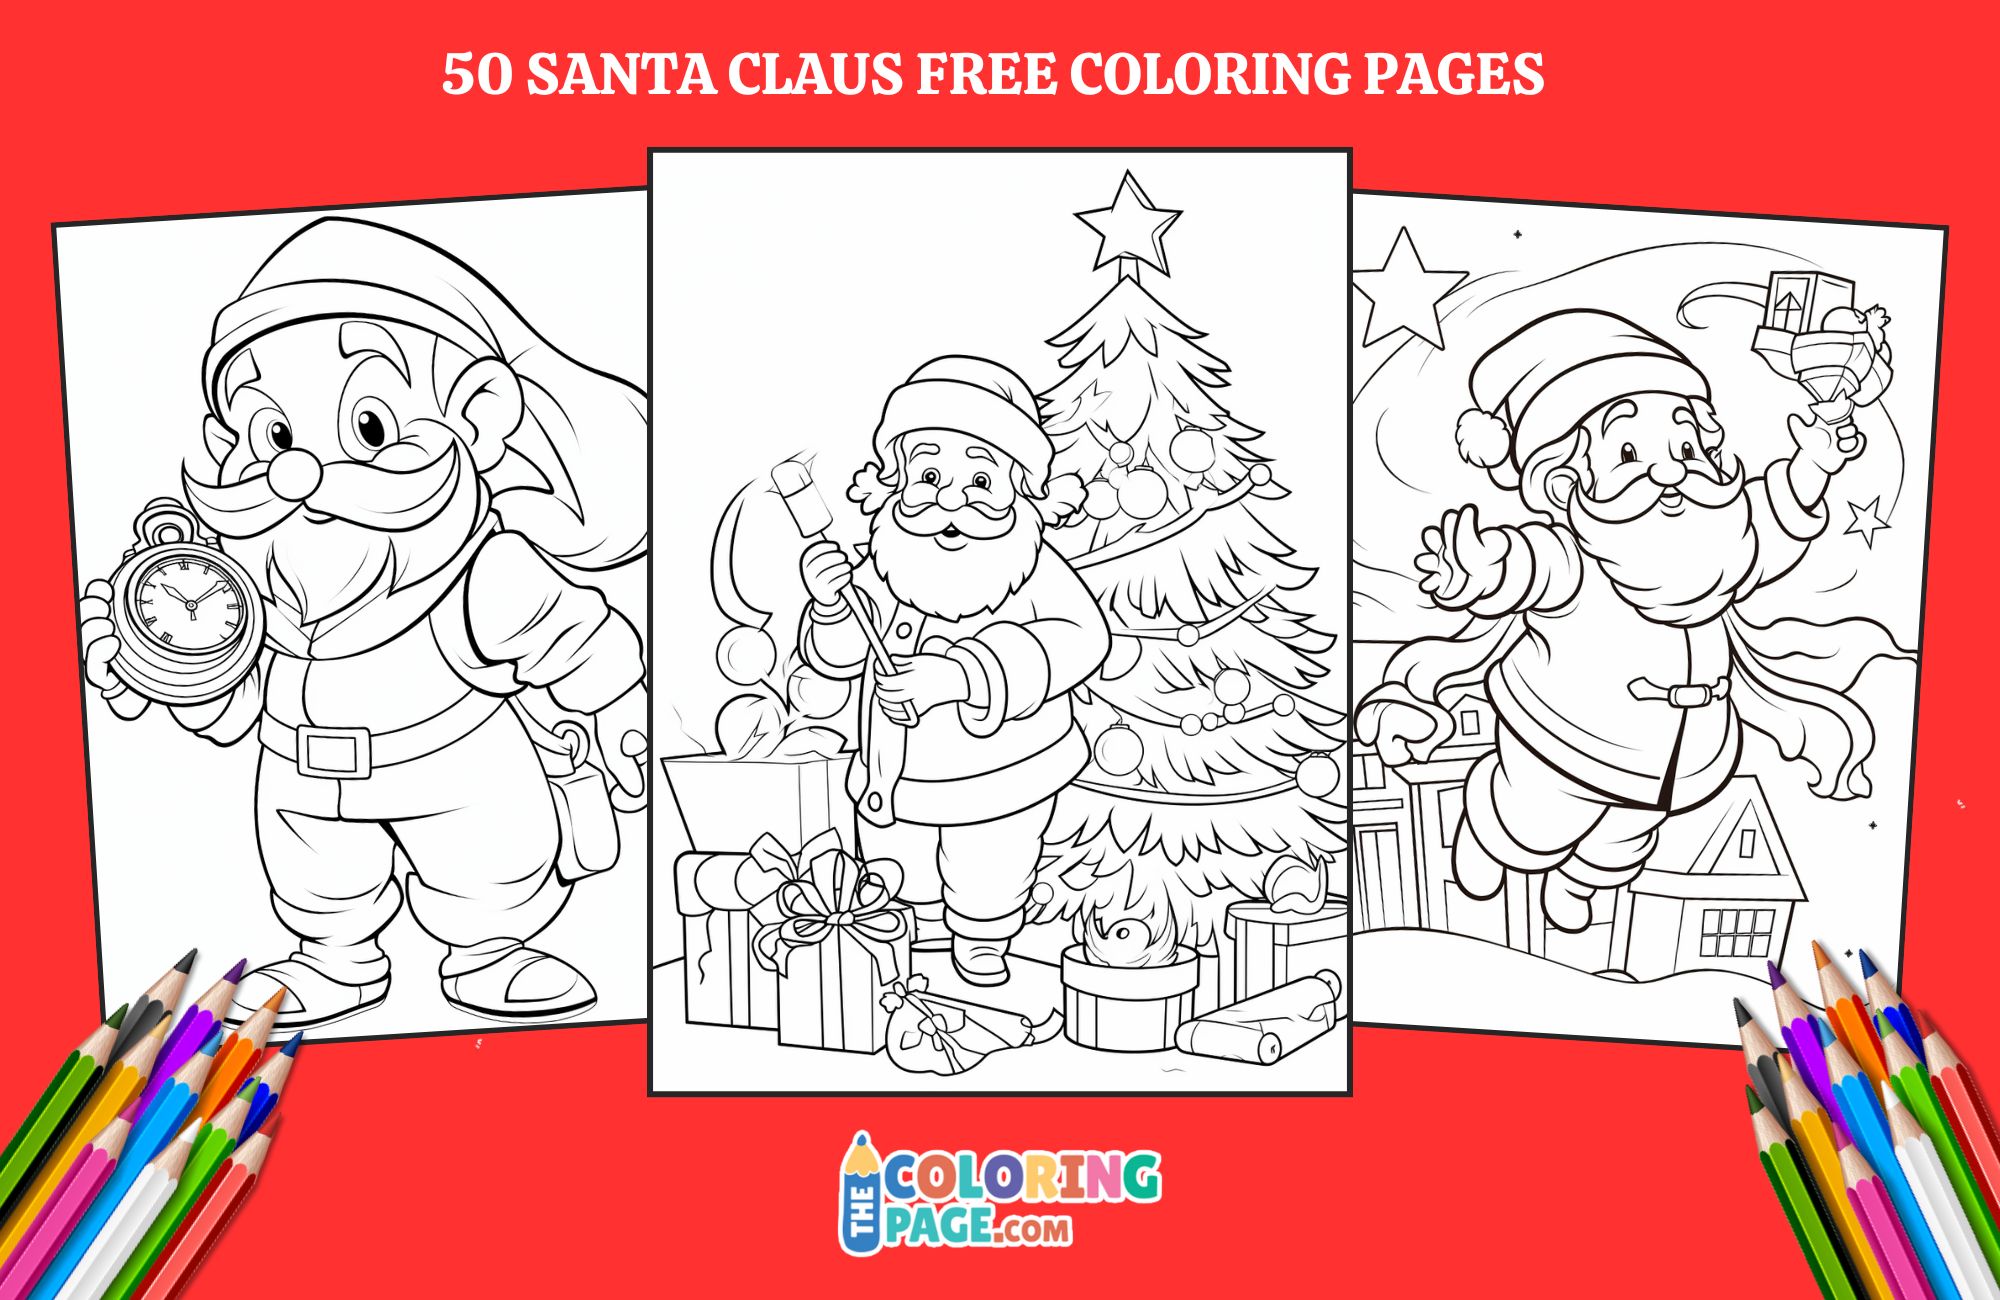 50 Free Santa Claus Coloring Pages